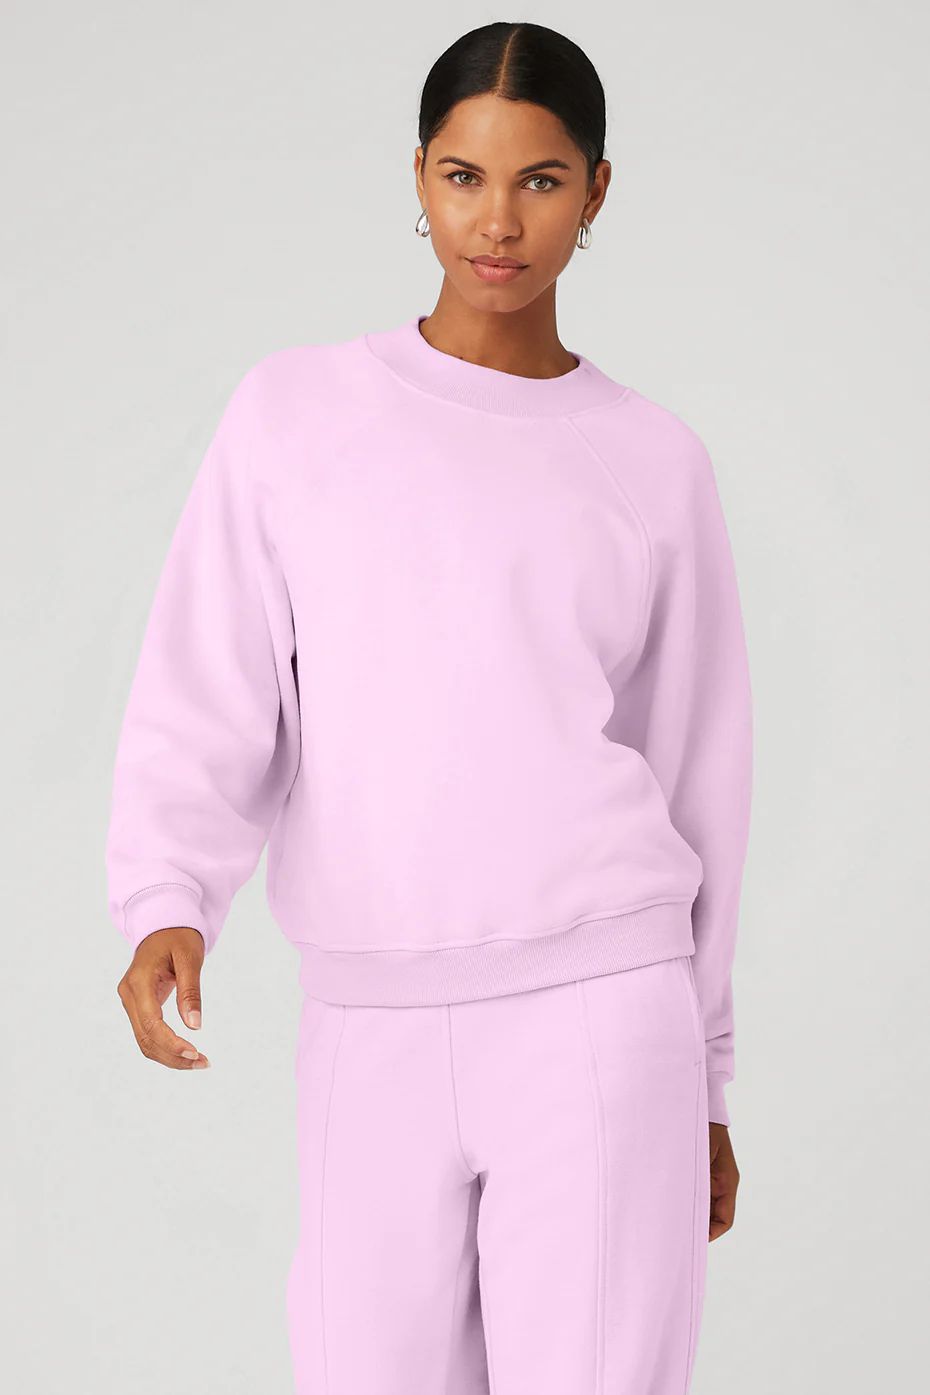 Heavy Weight Free Time Crewneck Neck Pullover Top in Sugarplum Pink, Size: Small | Alo YogaÅ½ | Alo Yoga